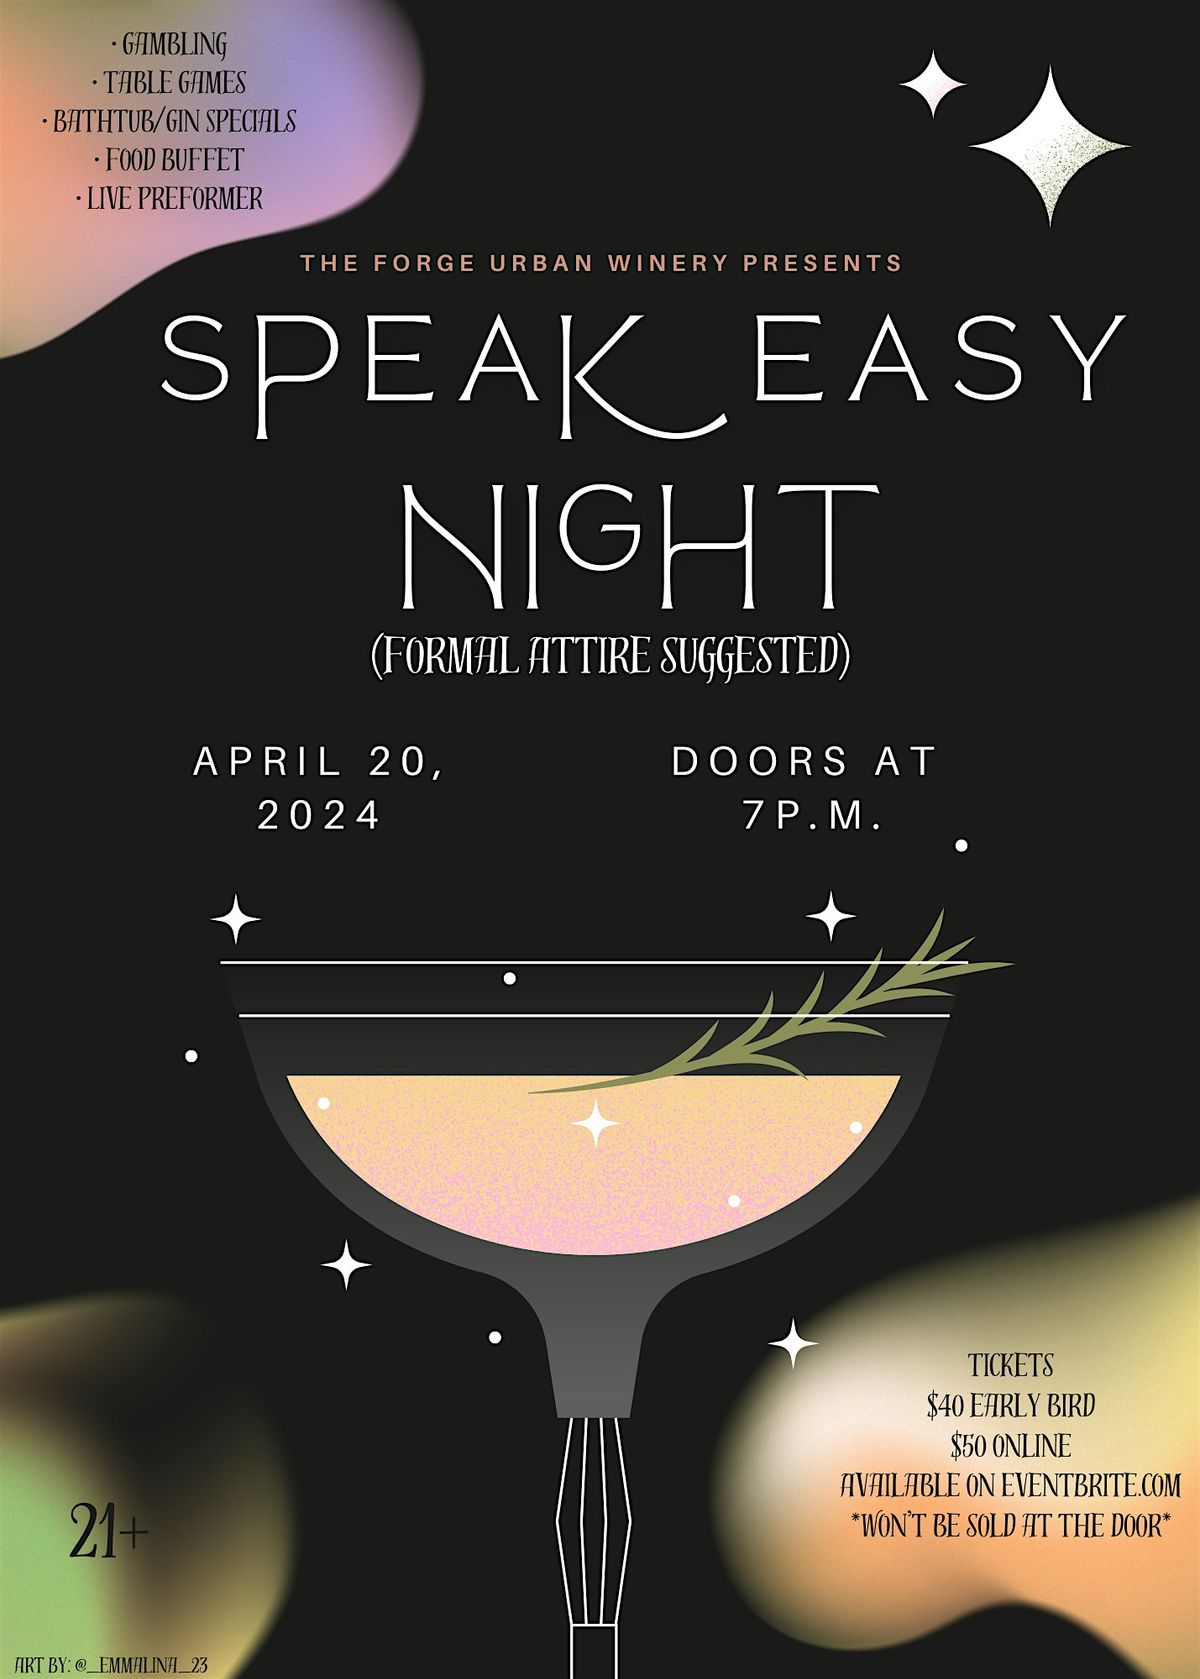 Speakeasy Night at The Forge Urban Winery (21+)